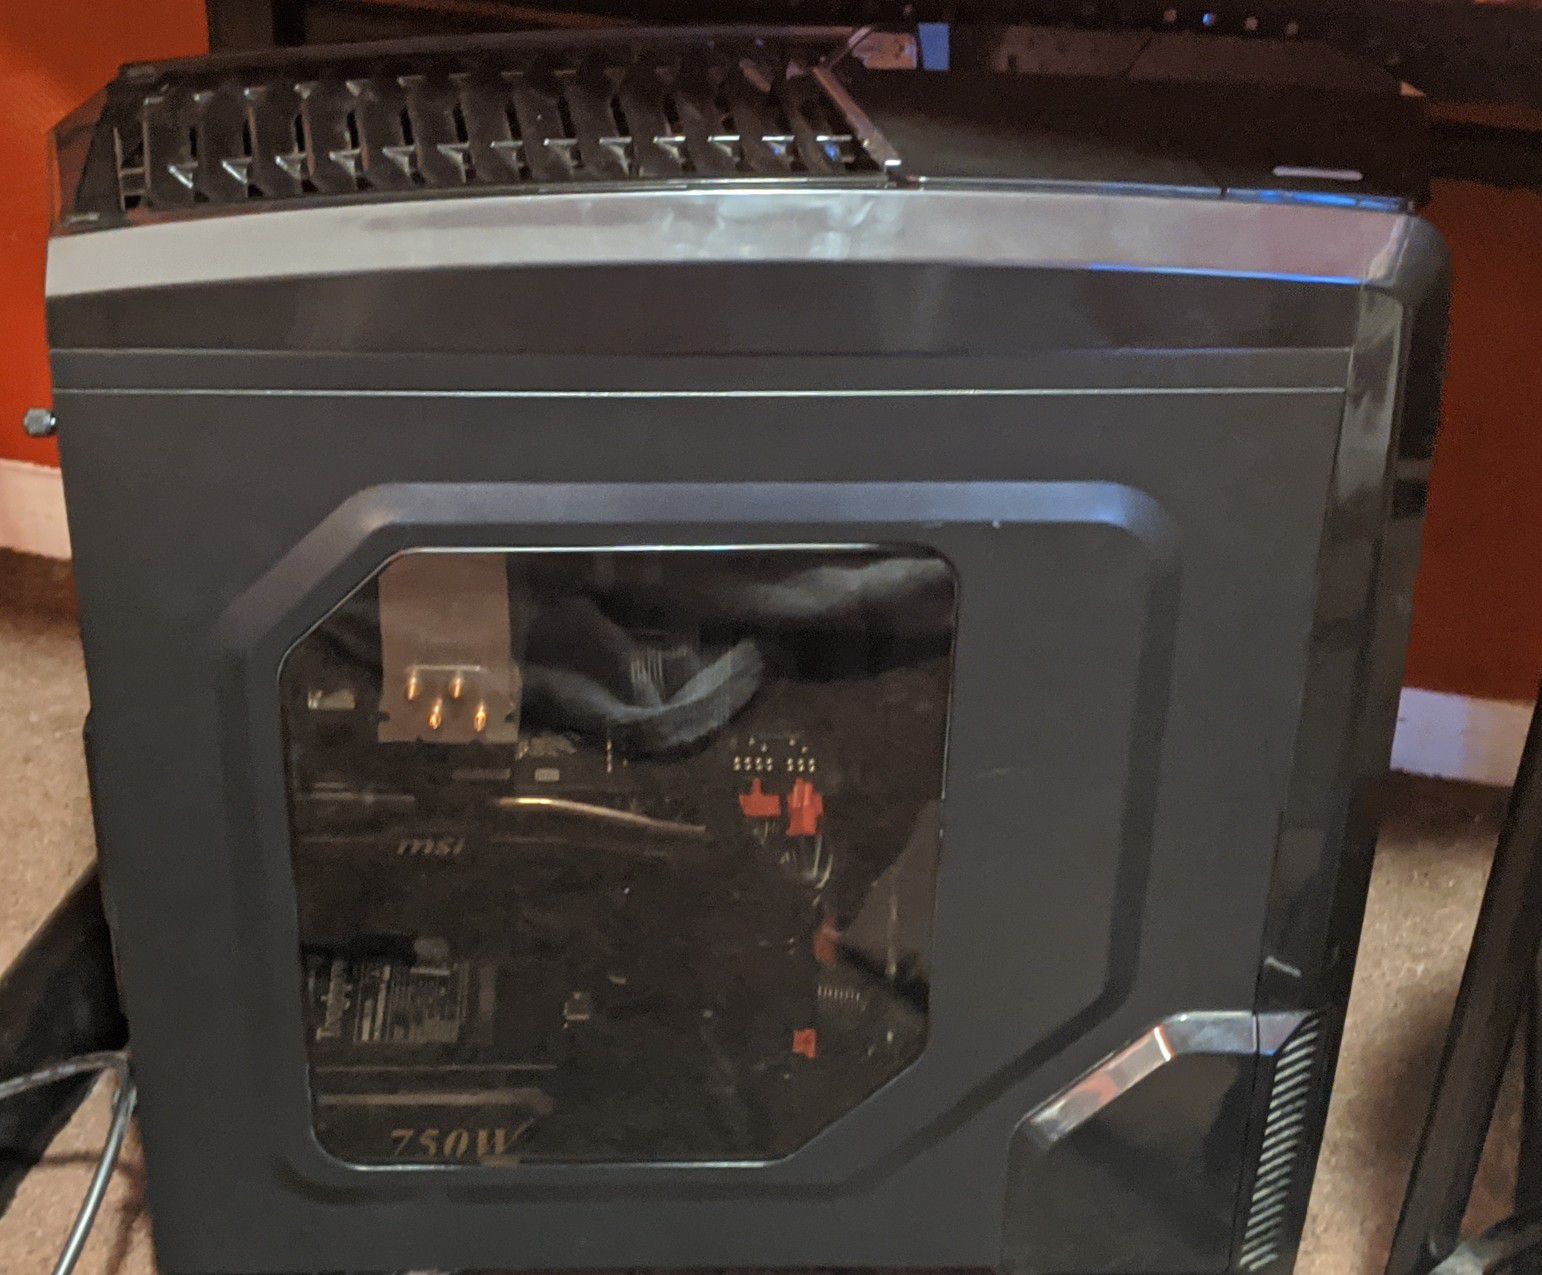 CyberPower PC- Gaming PC